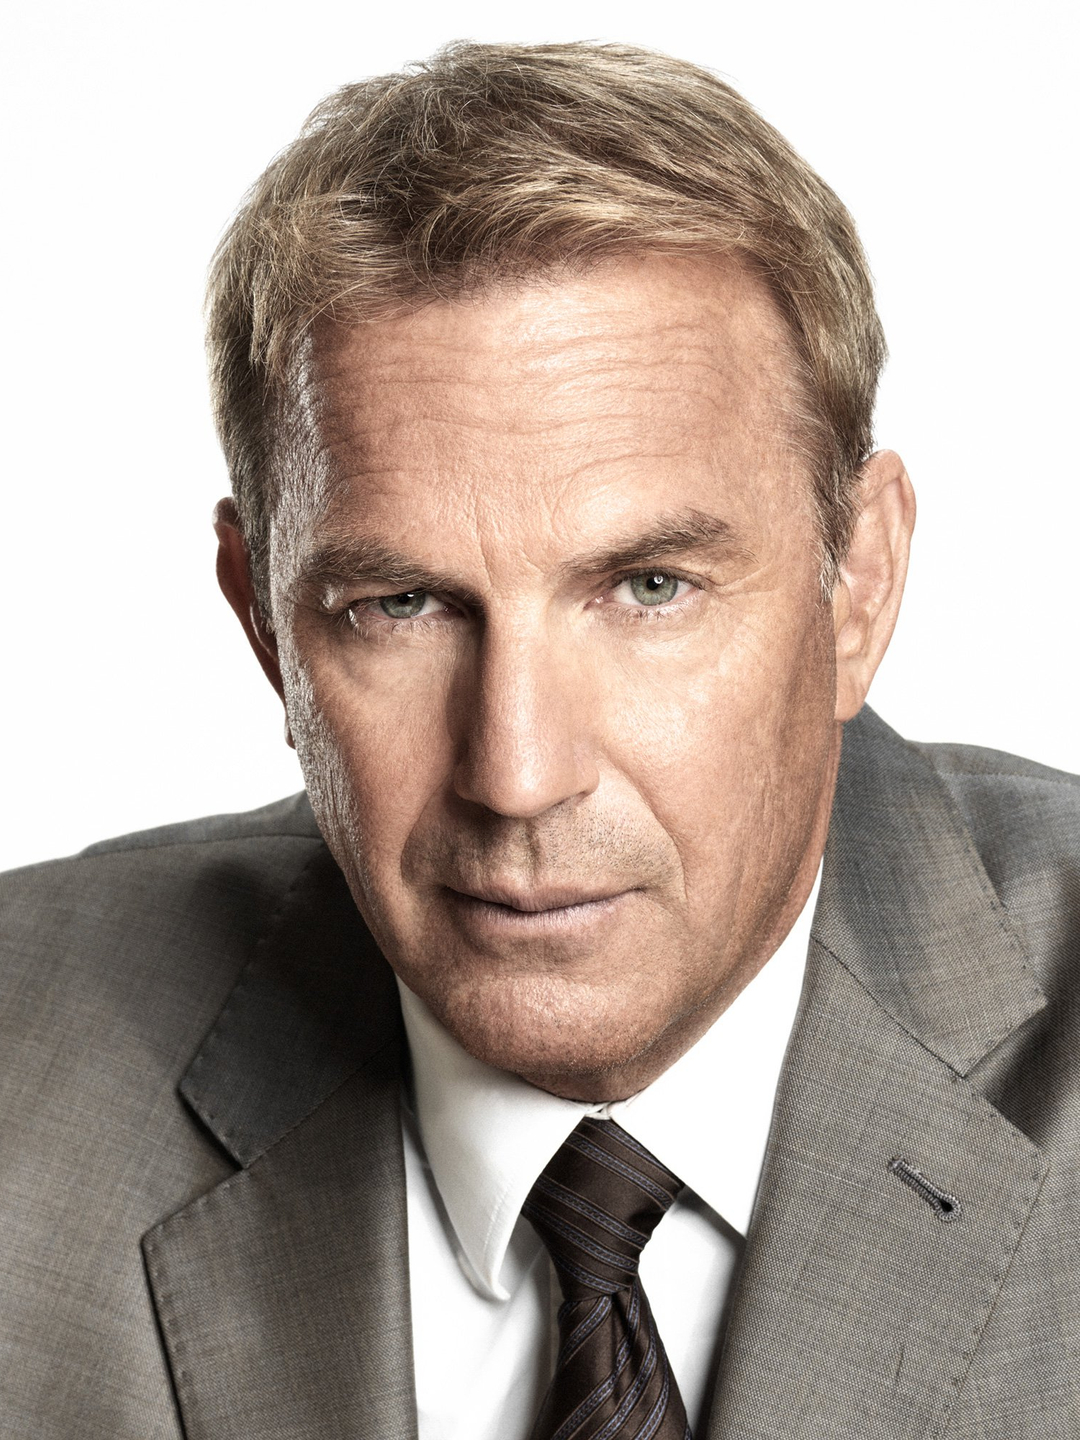 Kevin Costner story of success